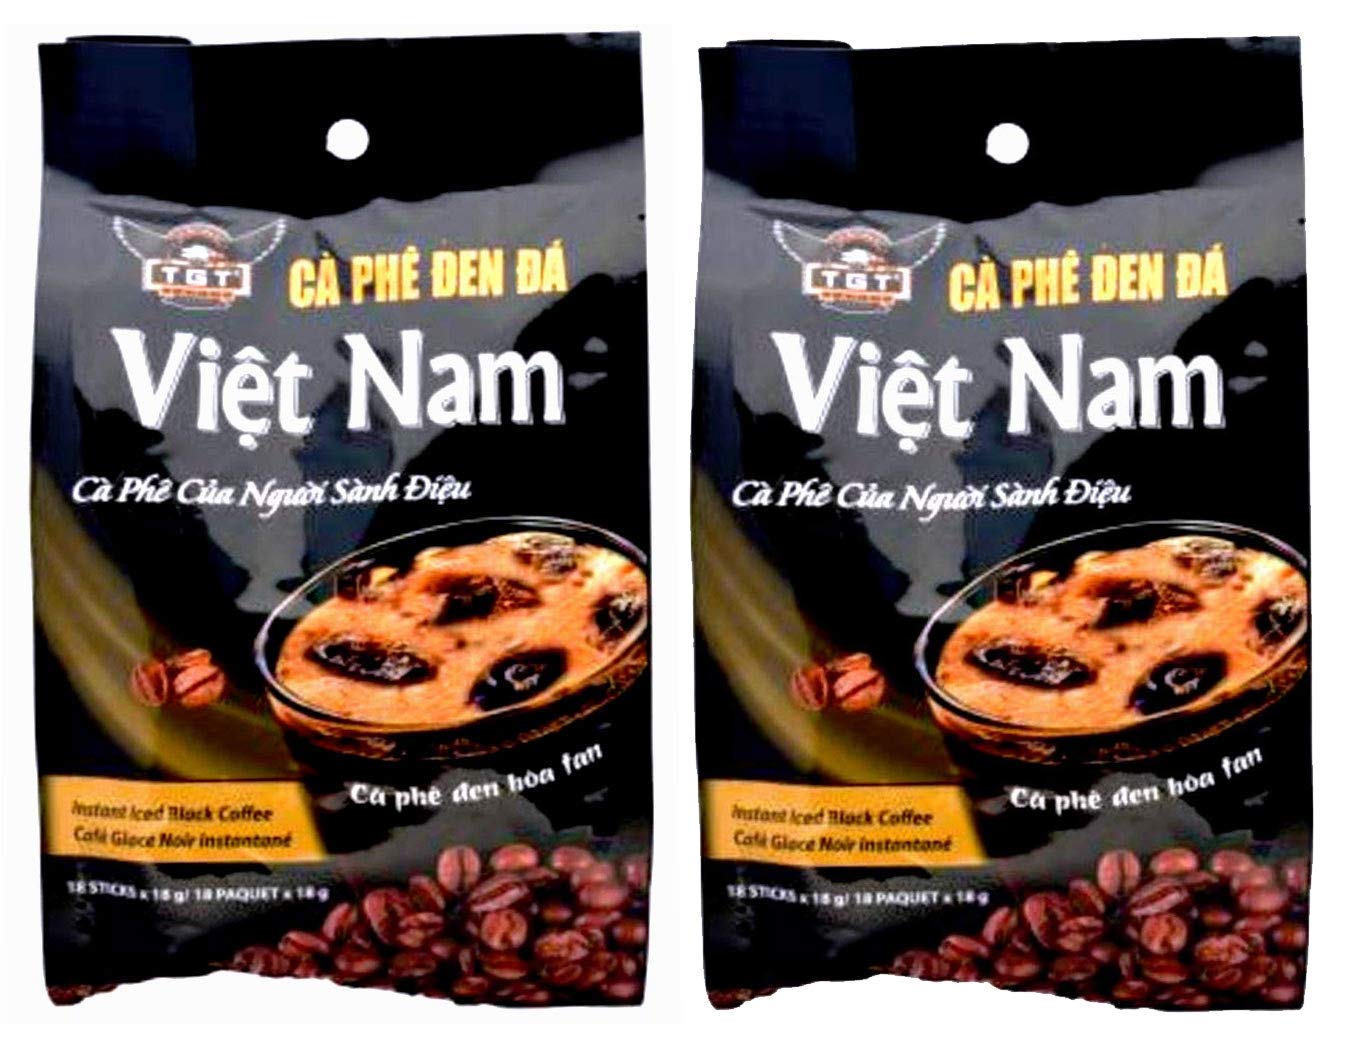 TGT Instant Iced Black Coffee, The Original Vietnamese Instant Coffee Mix, Café ?en Hòa Tan, Coffee Packets Single Serve, Great Coffee Gift for Office Travel Camping, Bag of 18 Packets x 18g, Pack of 2 : Grocery & Gourmet Food